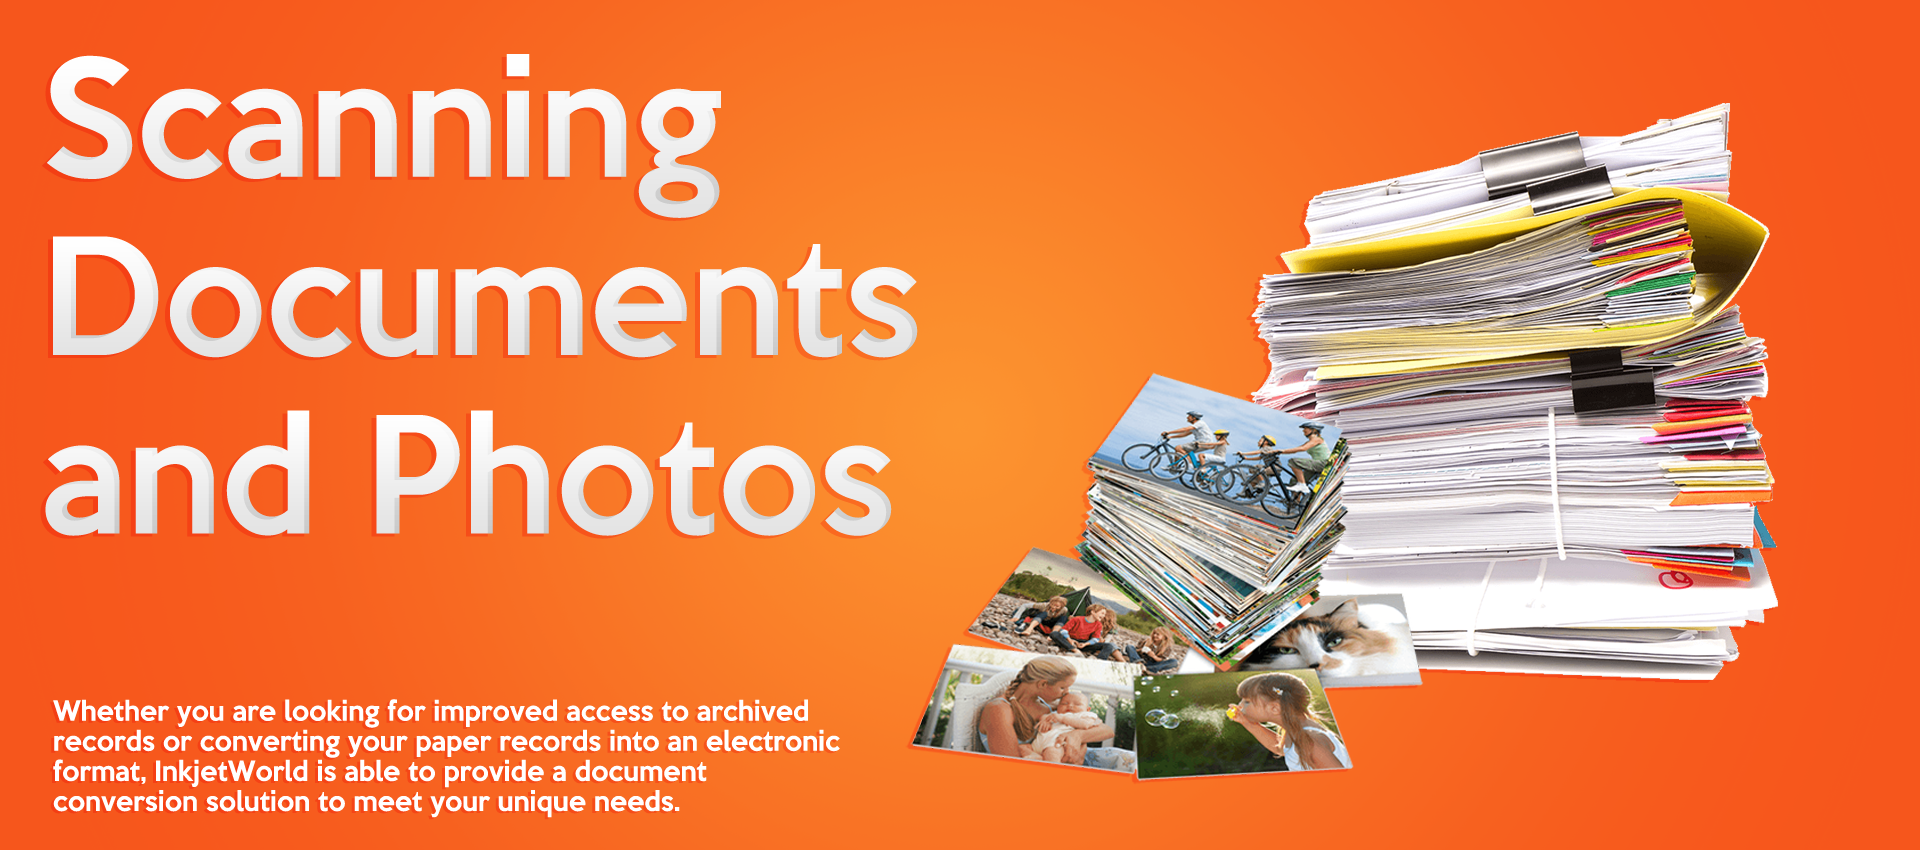 Scanning Documents and Photos Banner